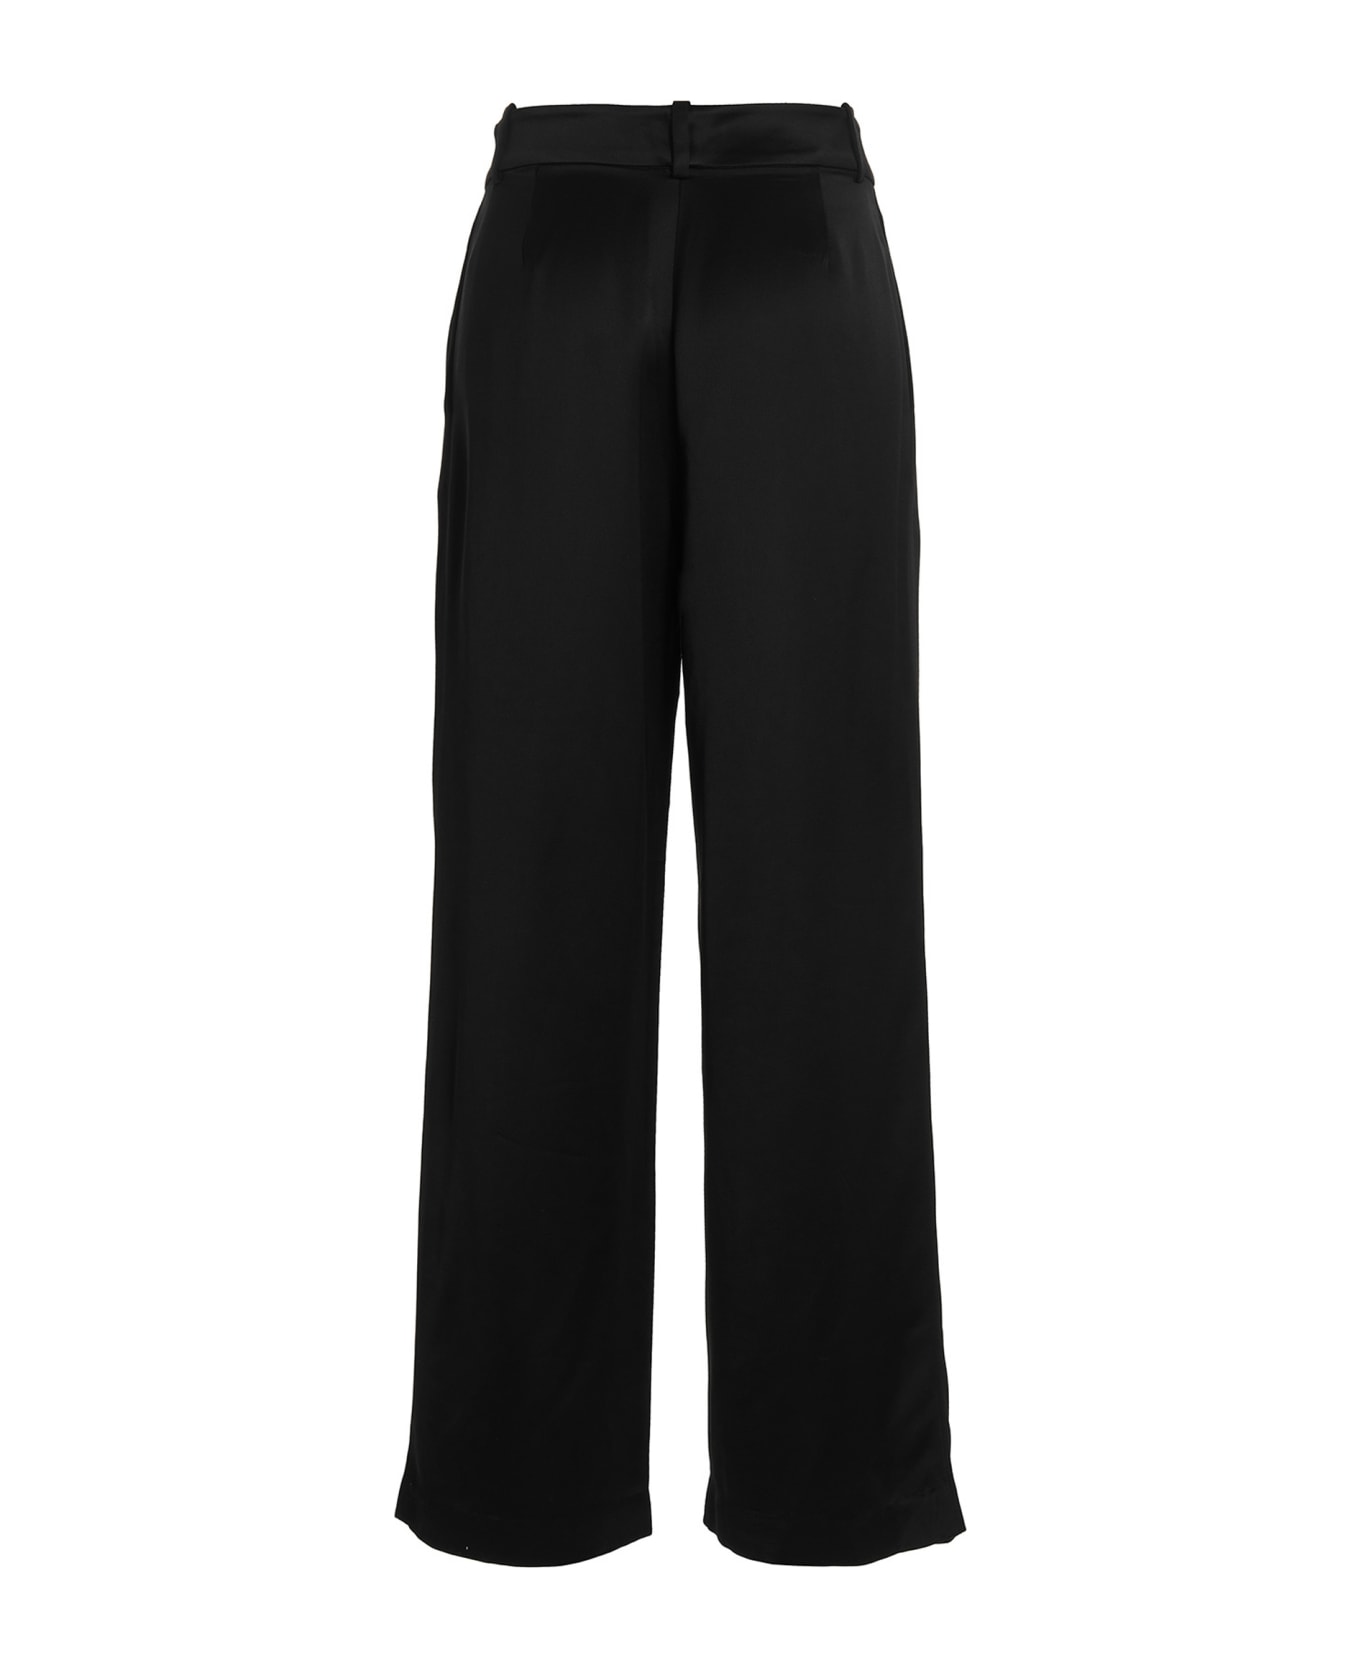 Co Pants With Front Pleats - Black  